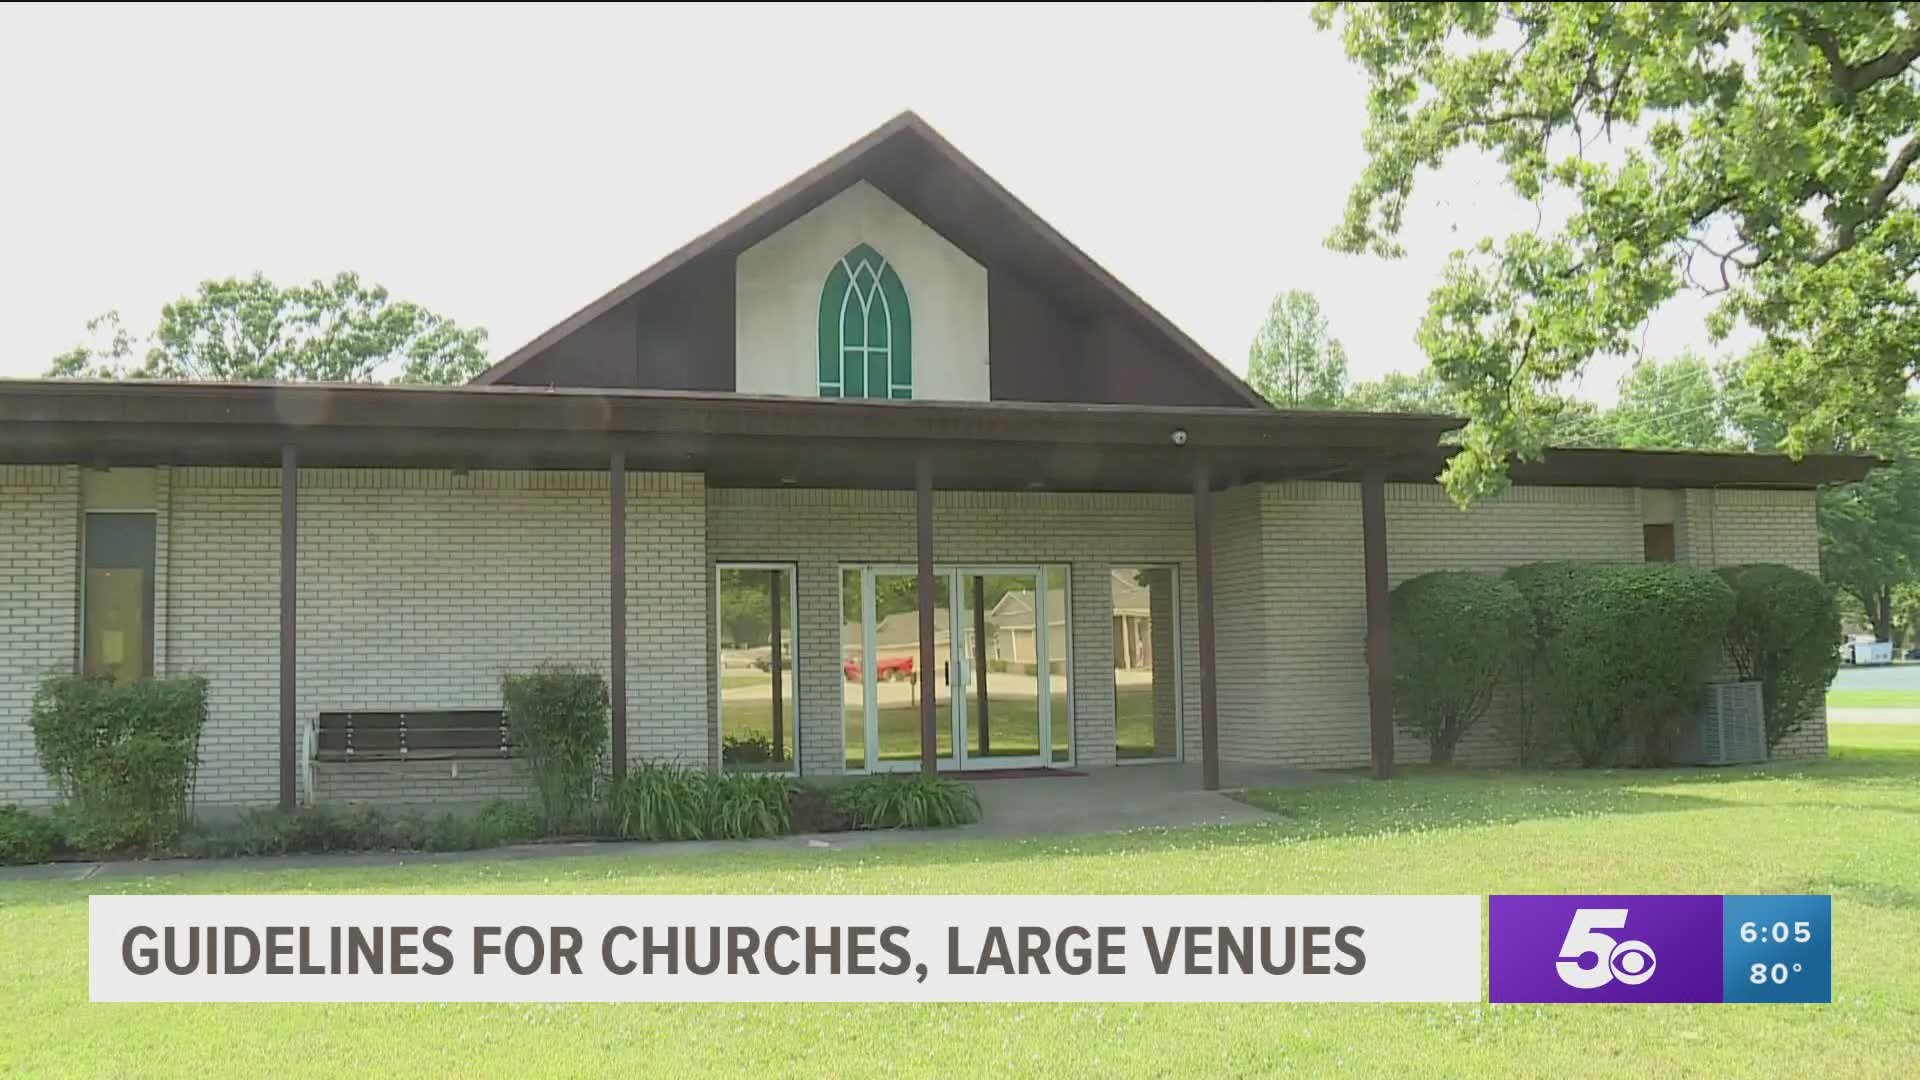 Reopening guidelines for churches and large venues